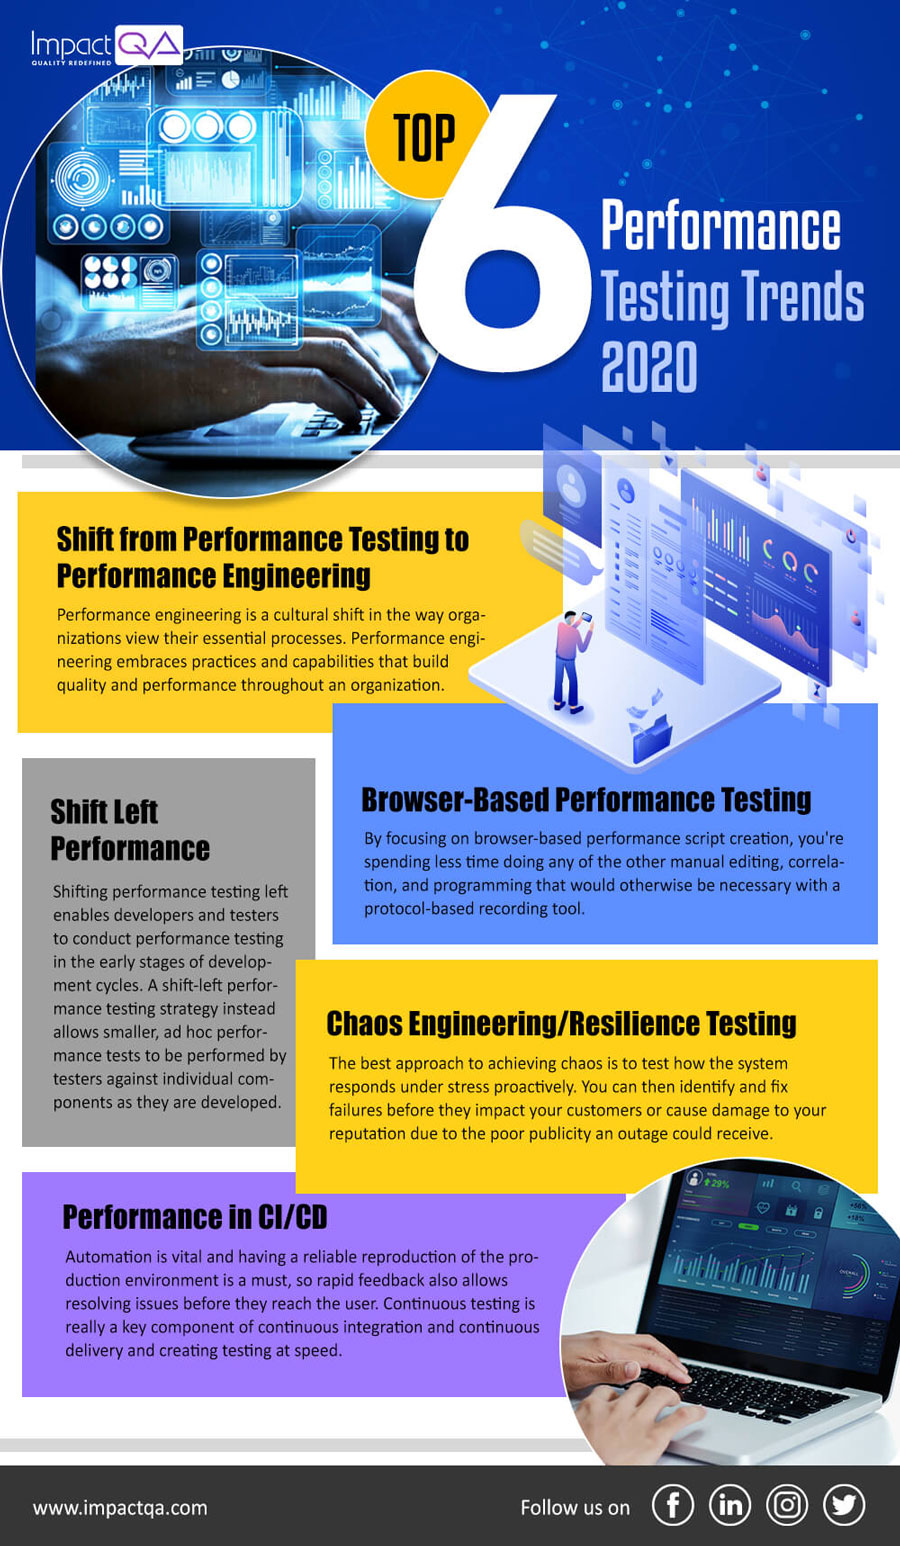 6 Top Performance Testing Trends 2020